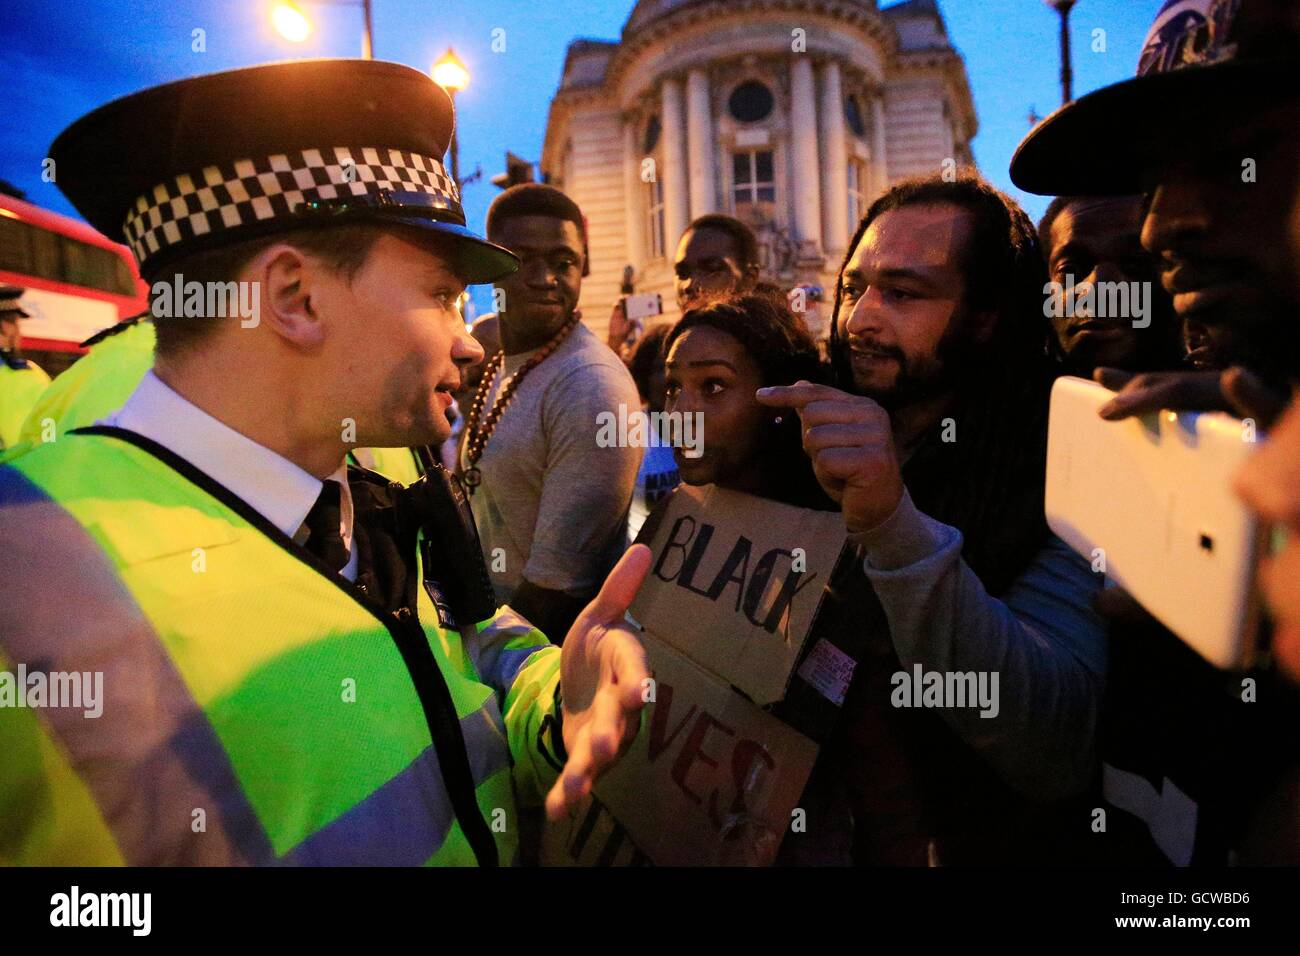 Police on Acre Lane in Brixton, London, as demonstrators protest against the killing of two black men in the United States. Stock Photo